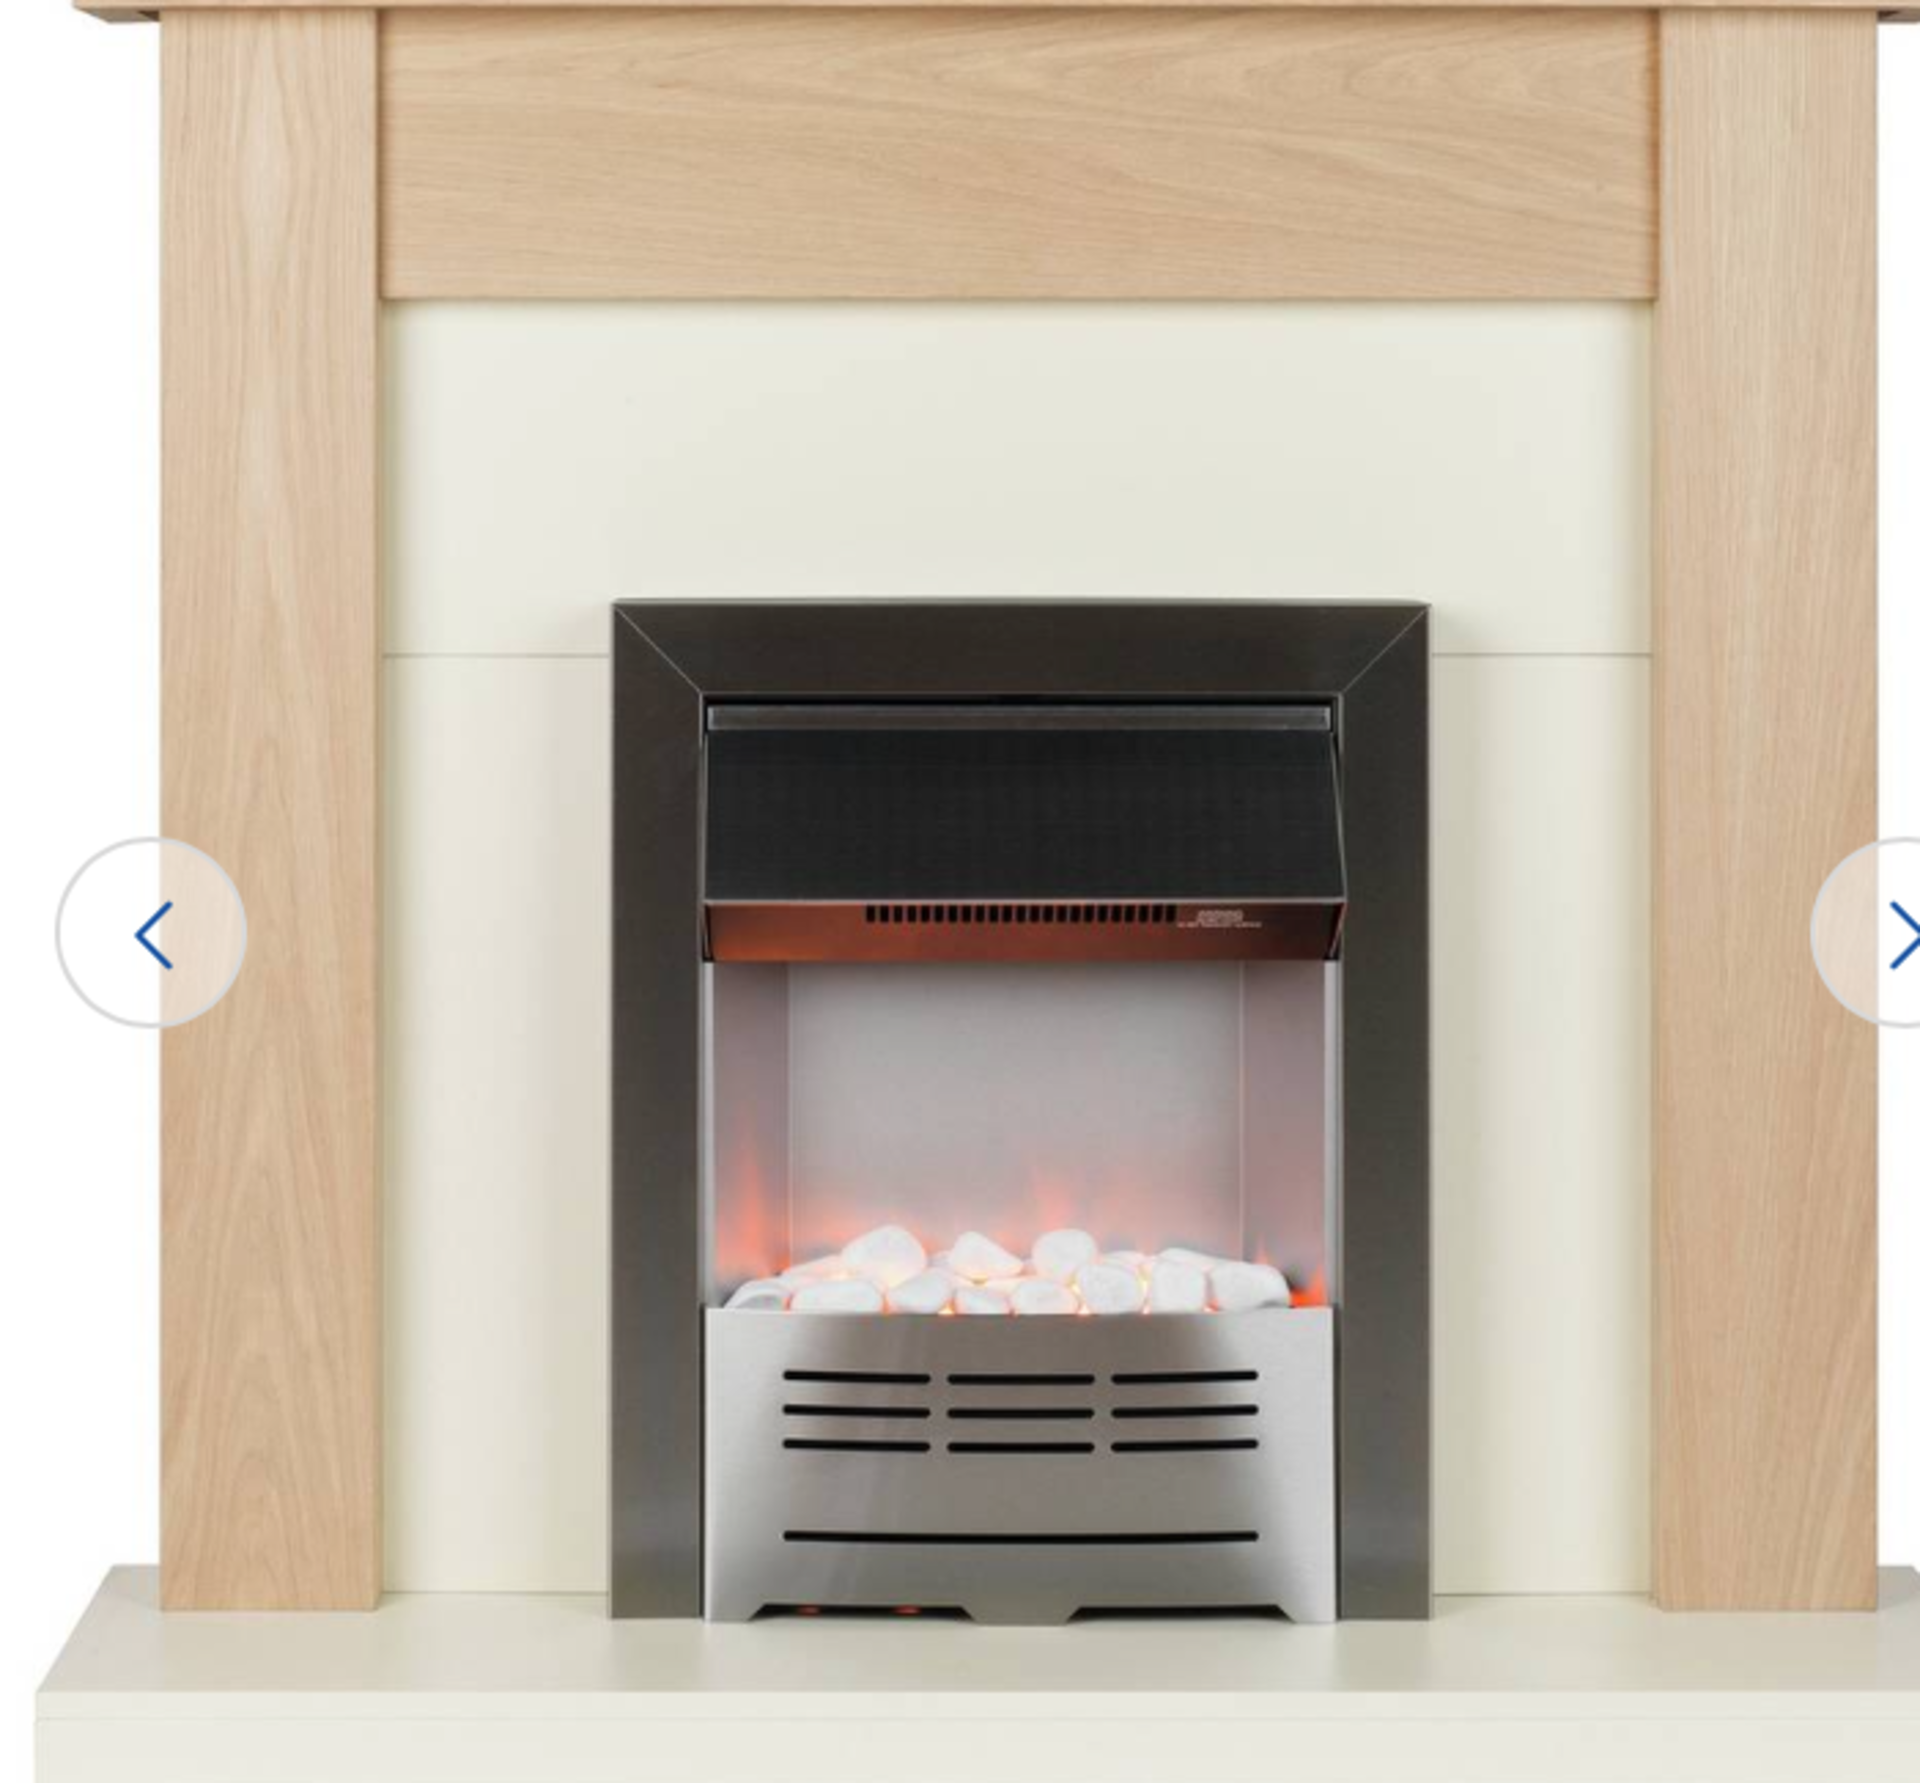 BRAND NEW BOXED Beldray Earlesworth 2kW Electric Fire Suite - Oak & Ivory. RRP £229.99. The Ea...